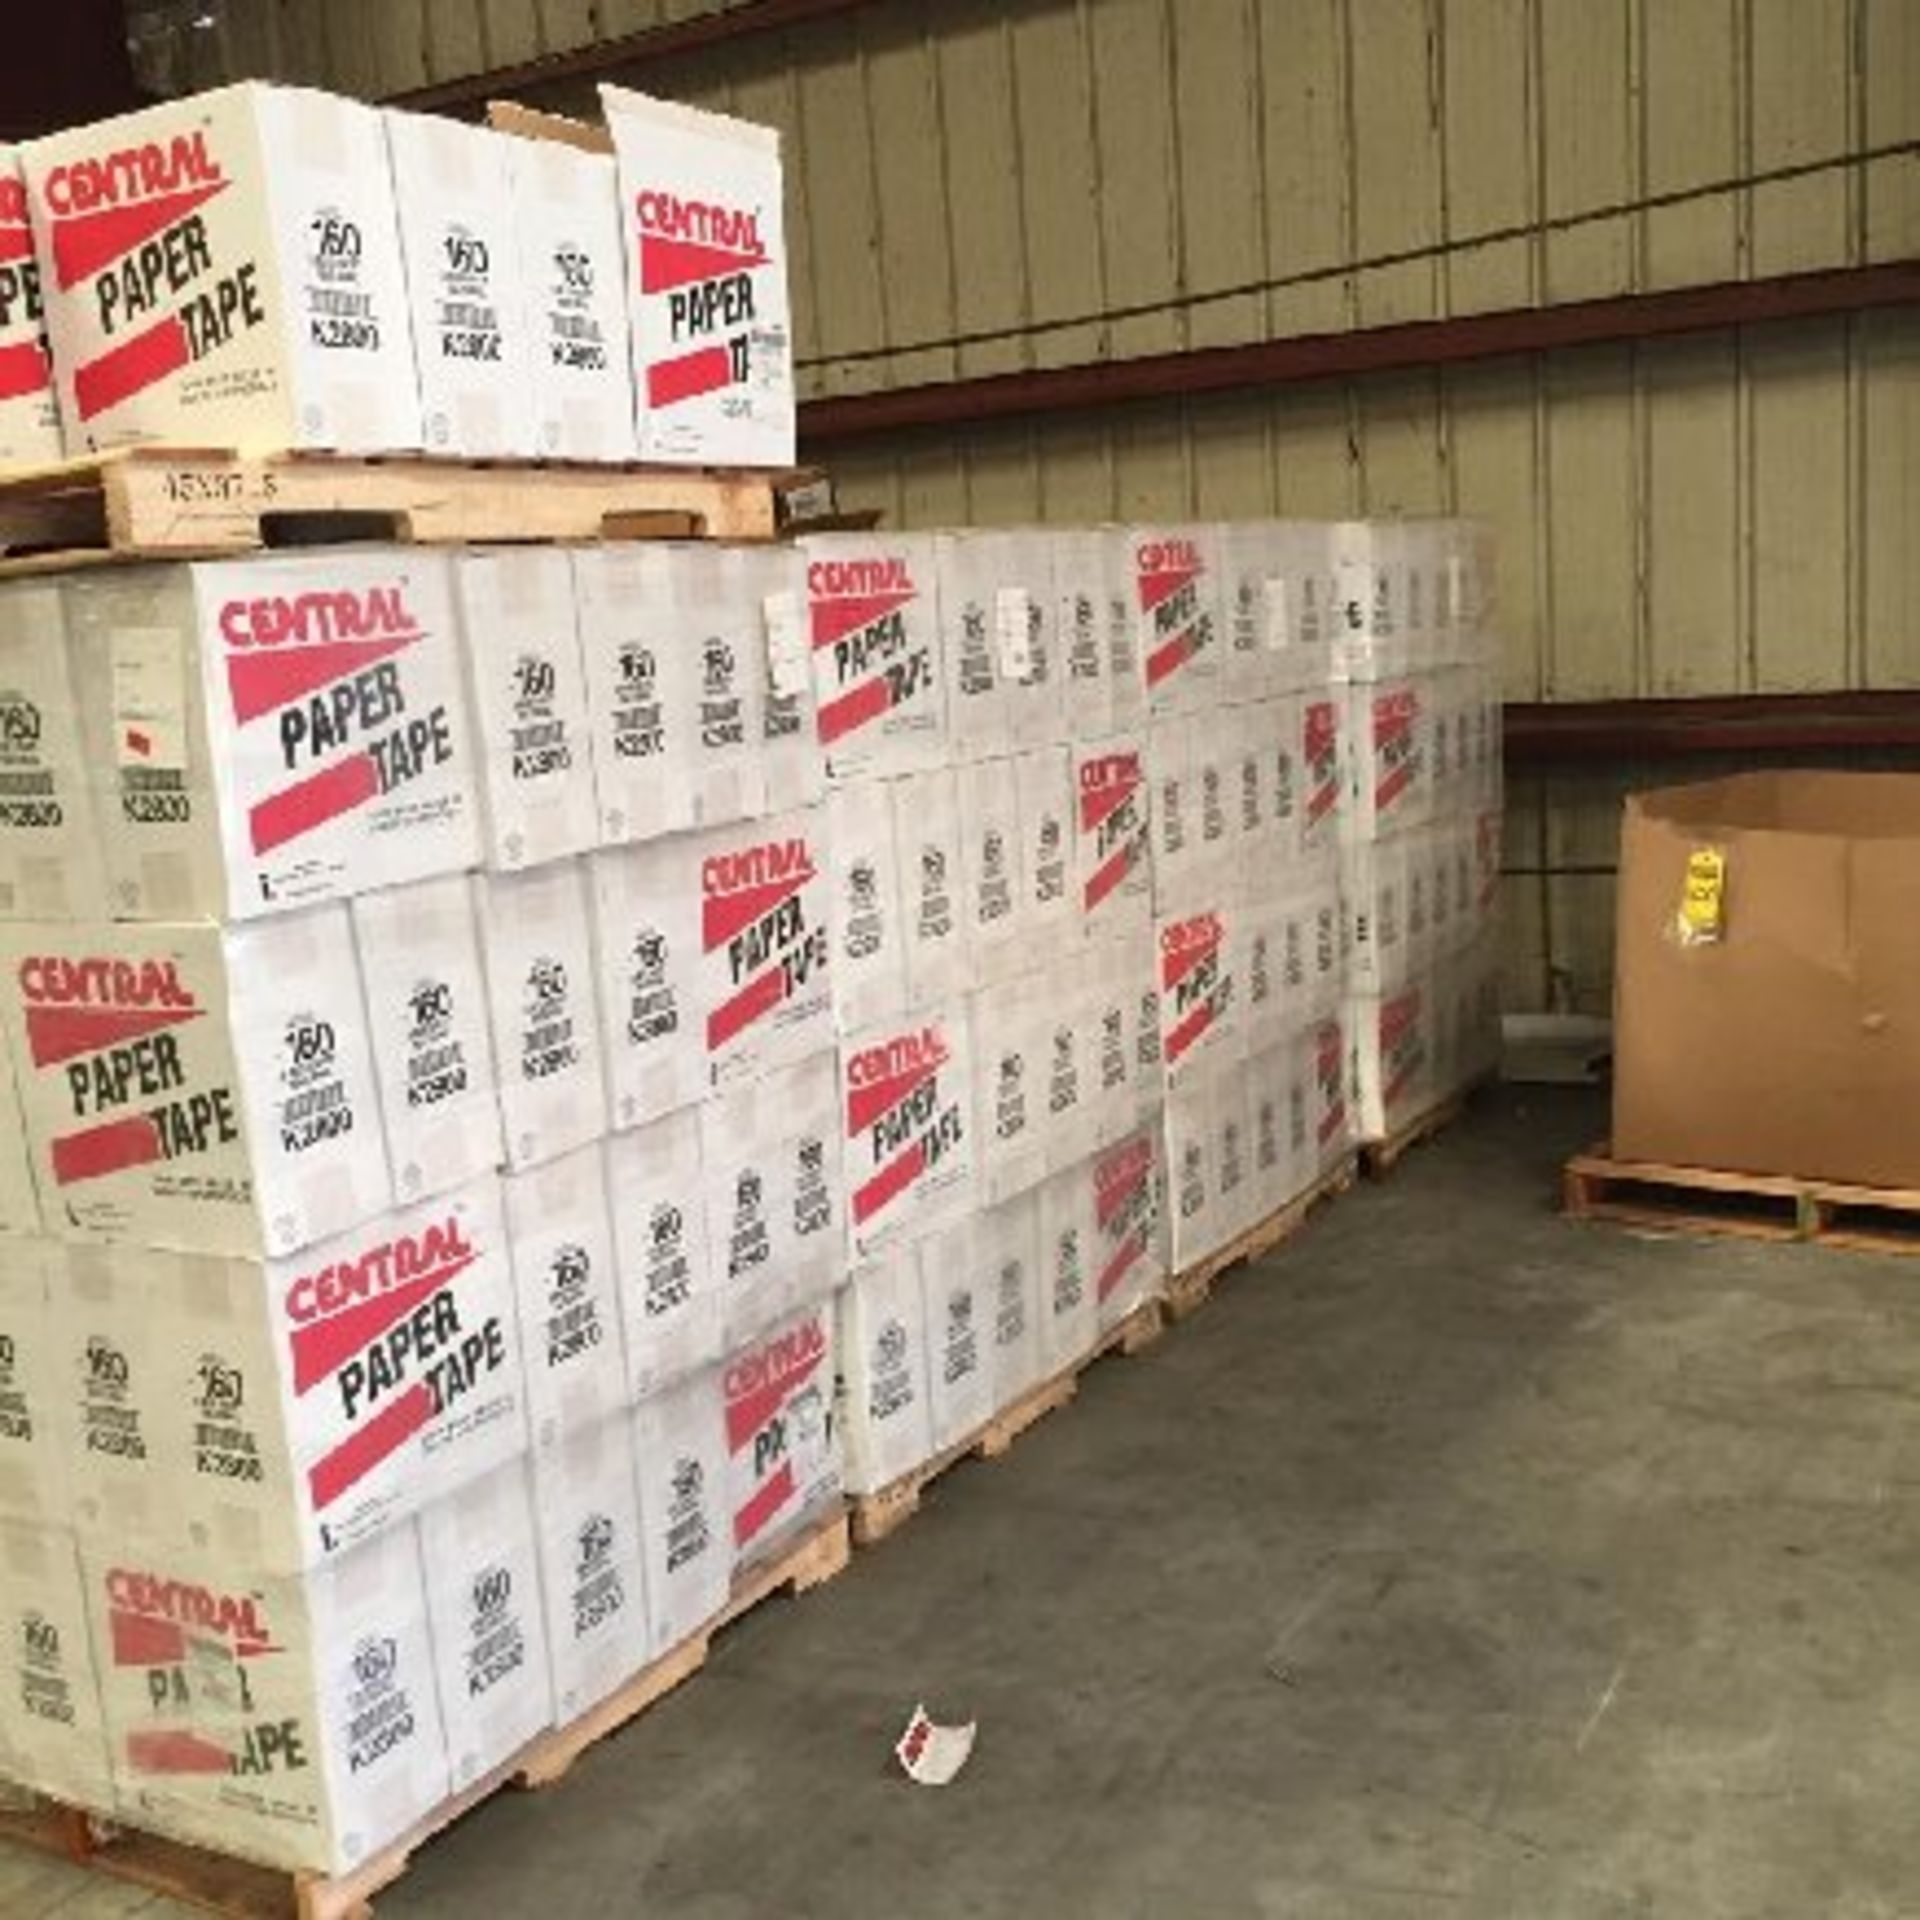 Central paper tape, 3" x 600 ft., 5 pallets, 10 rolls per box, Approx. 2000 rolls total